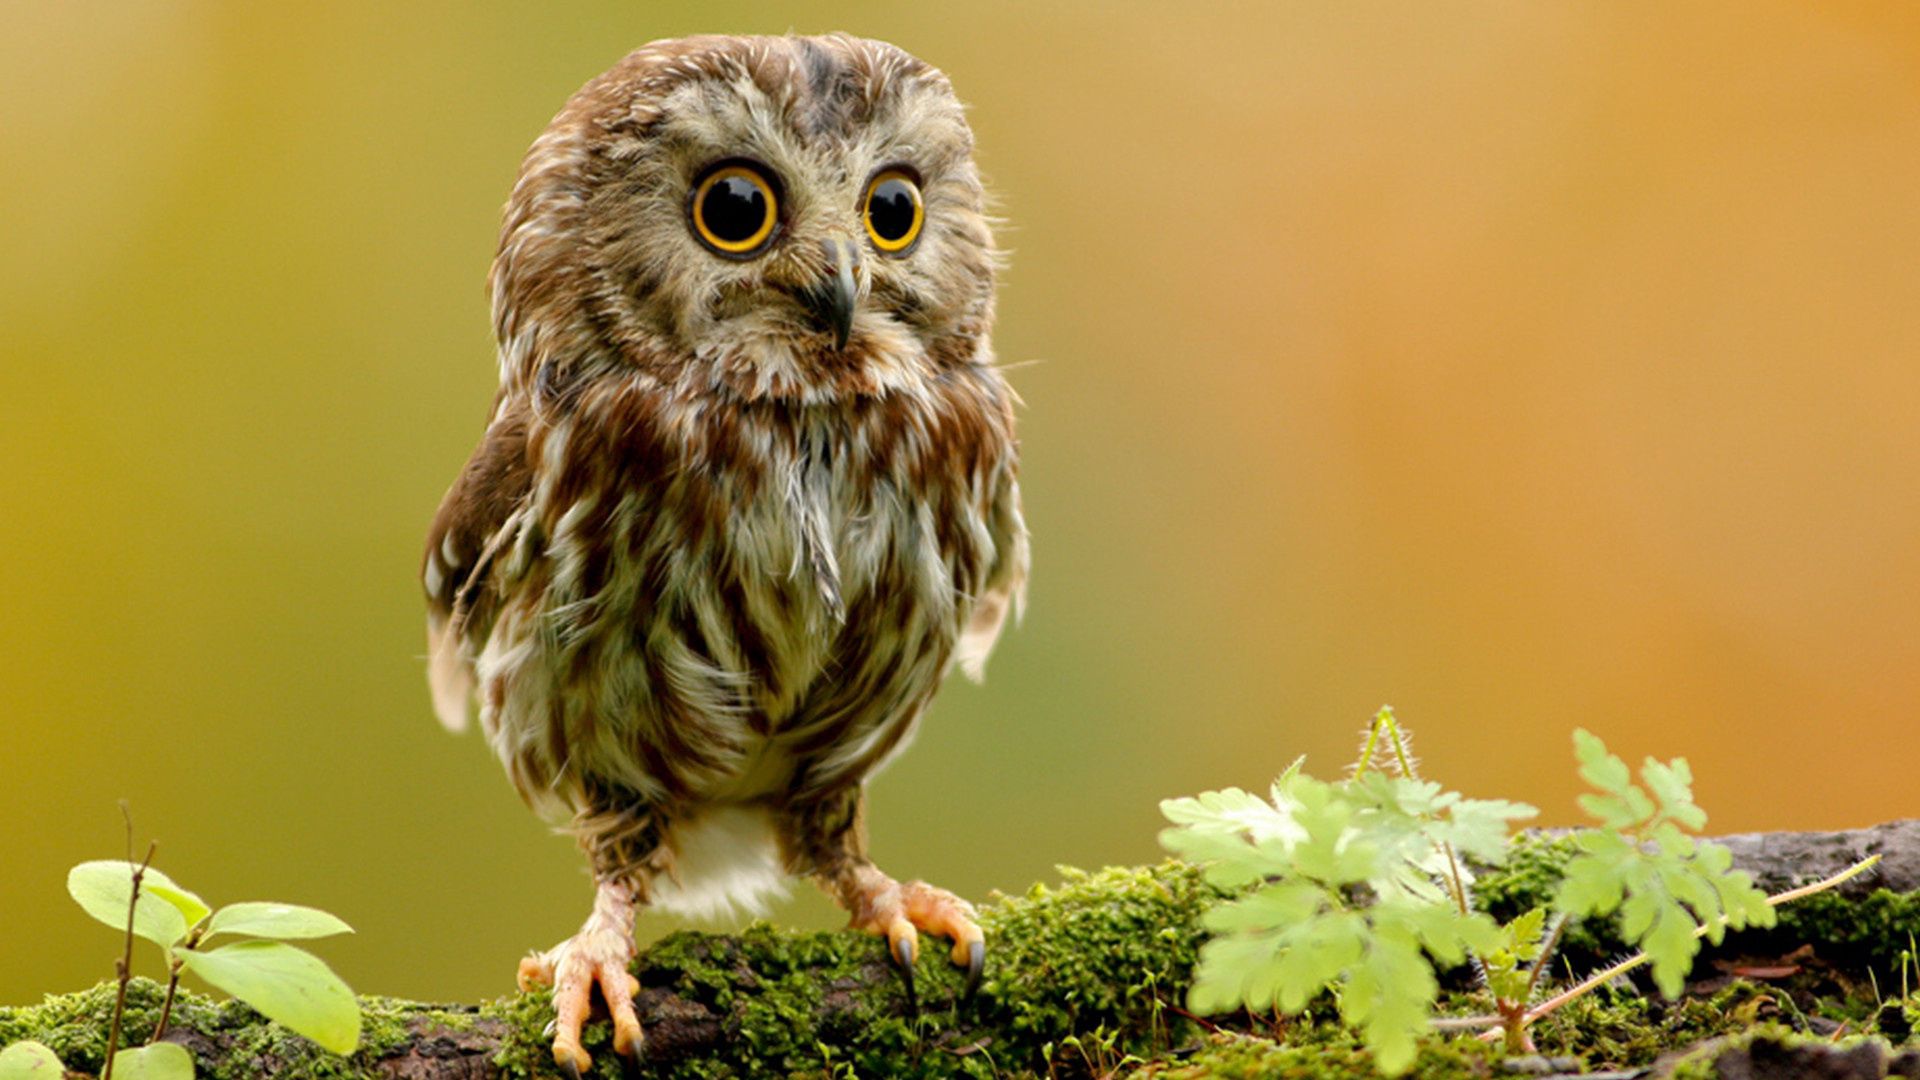 Popular Owlet images for mobile phone